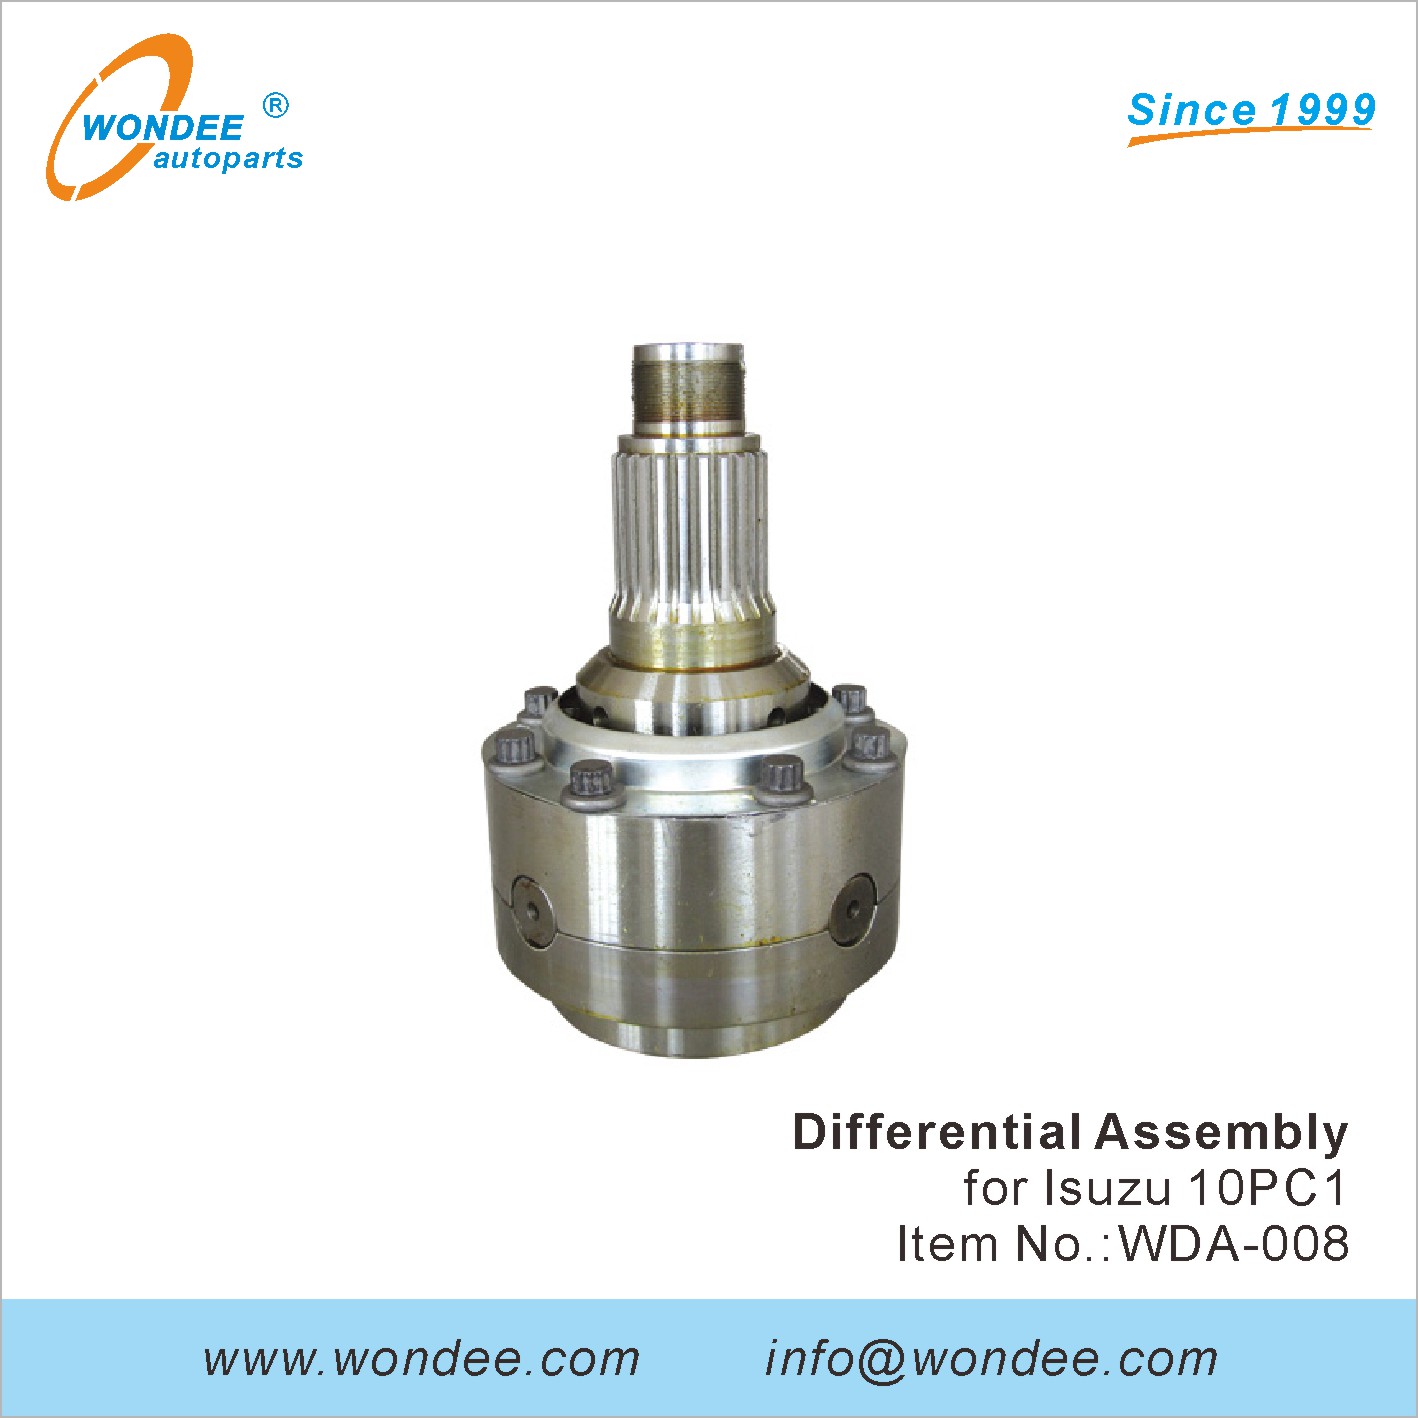 WONDEE differential assembly (8)